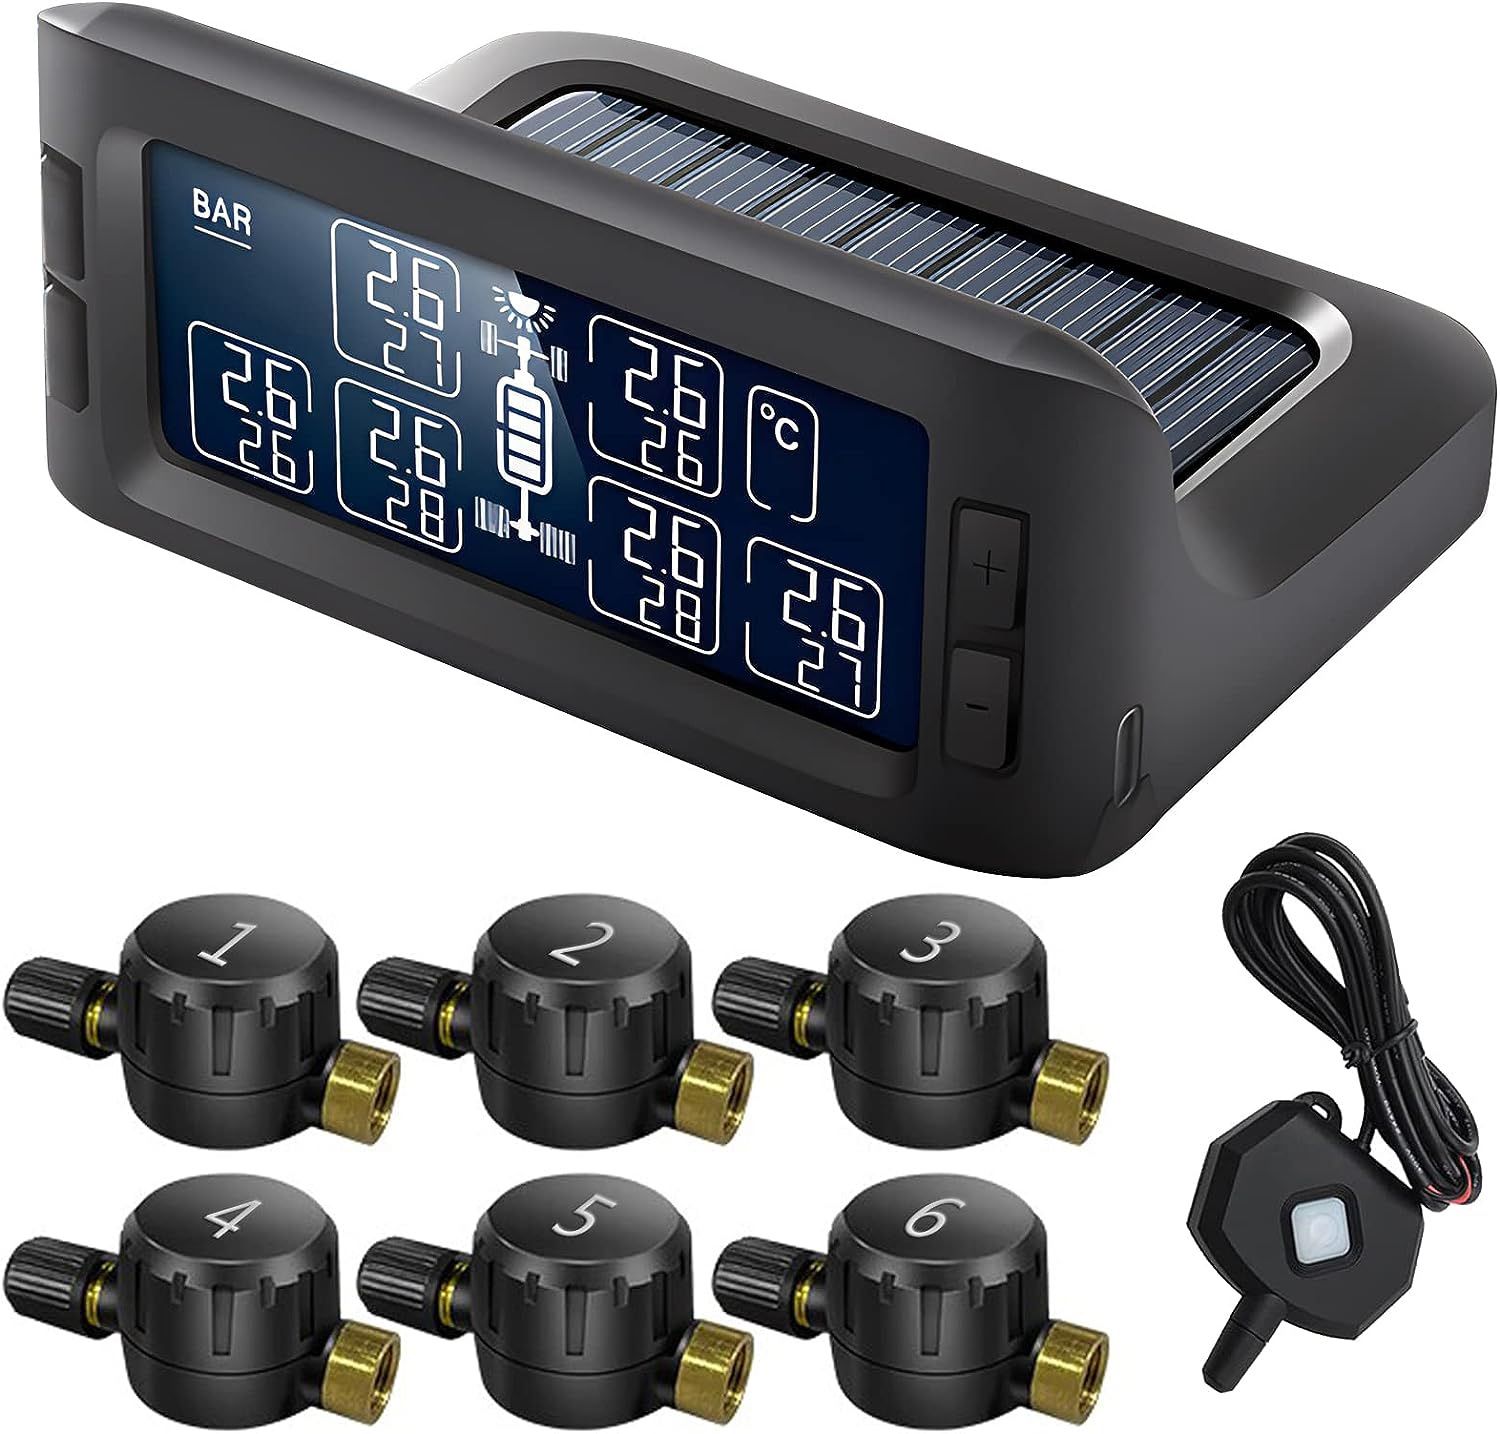 3.2inch RV Tire Pressure Monitoring System with 6 Flow Thru Sensors(0-15Bar/217PSI) & Repeater, 7 Alert Modes Trailer TPMS Real Time Display Pressure 